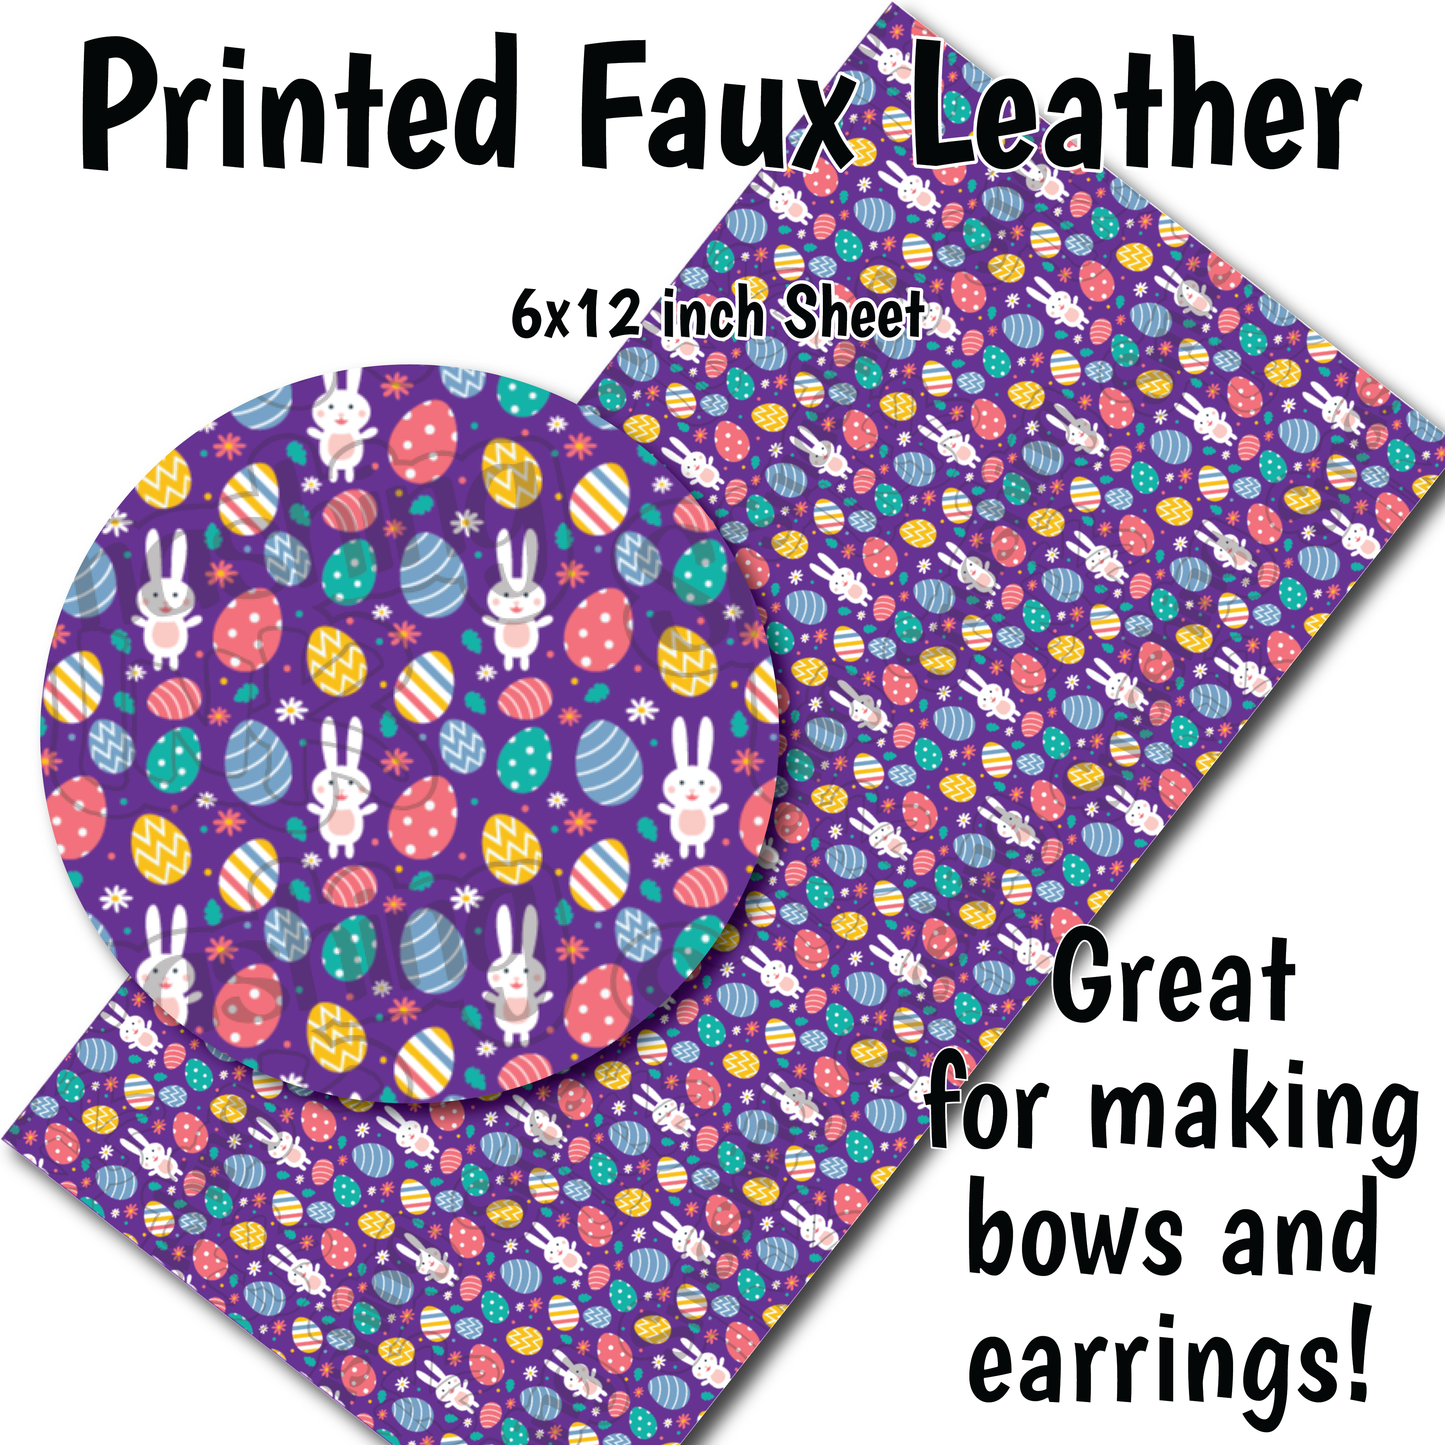 Easter Bunny Pattern - Faux Leather Sheet (SHIPS IN 3 BUS DAYS)